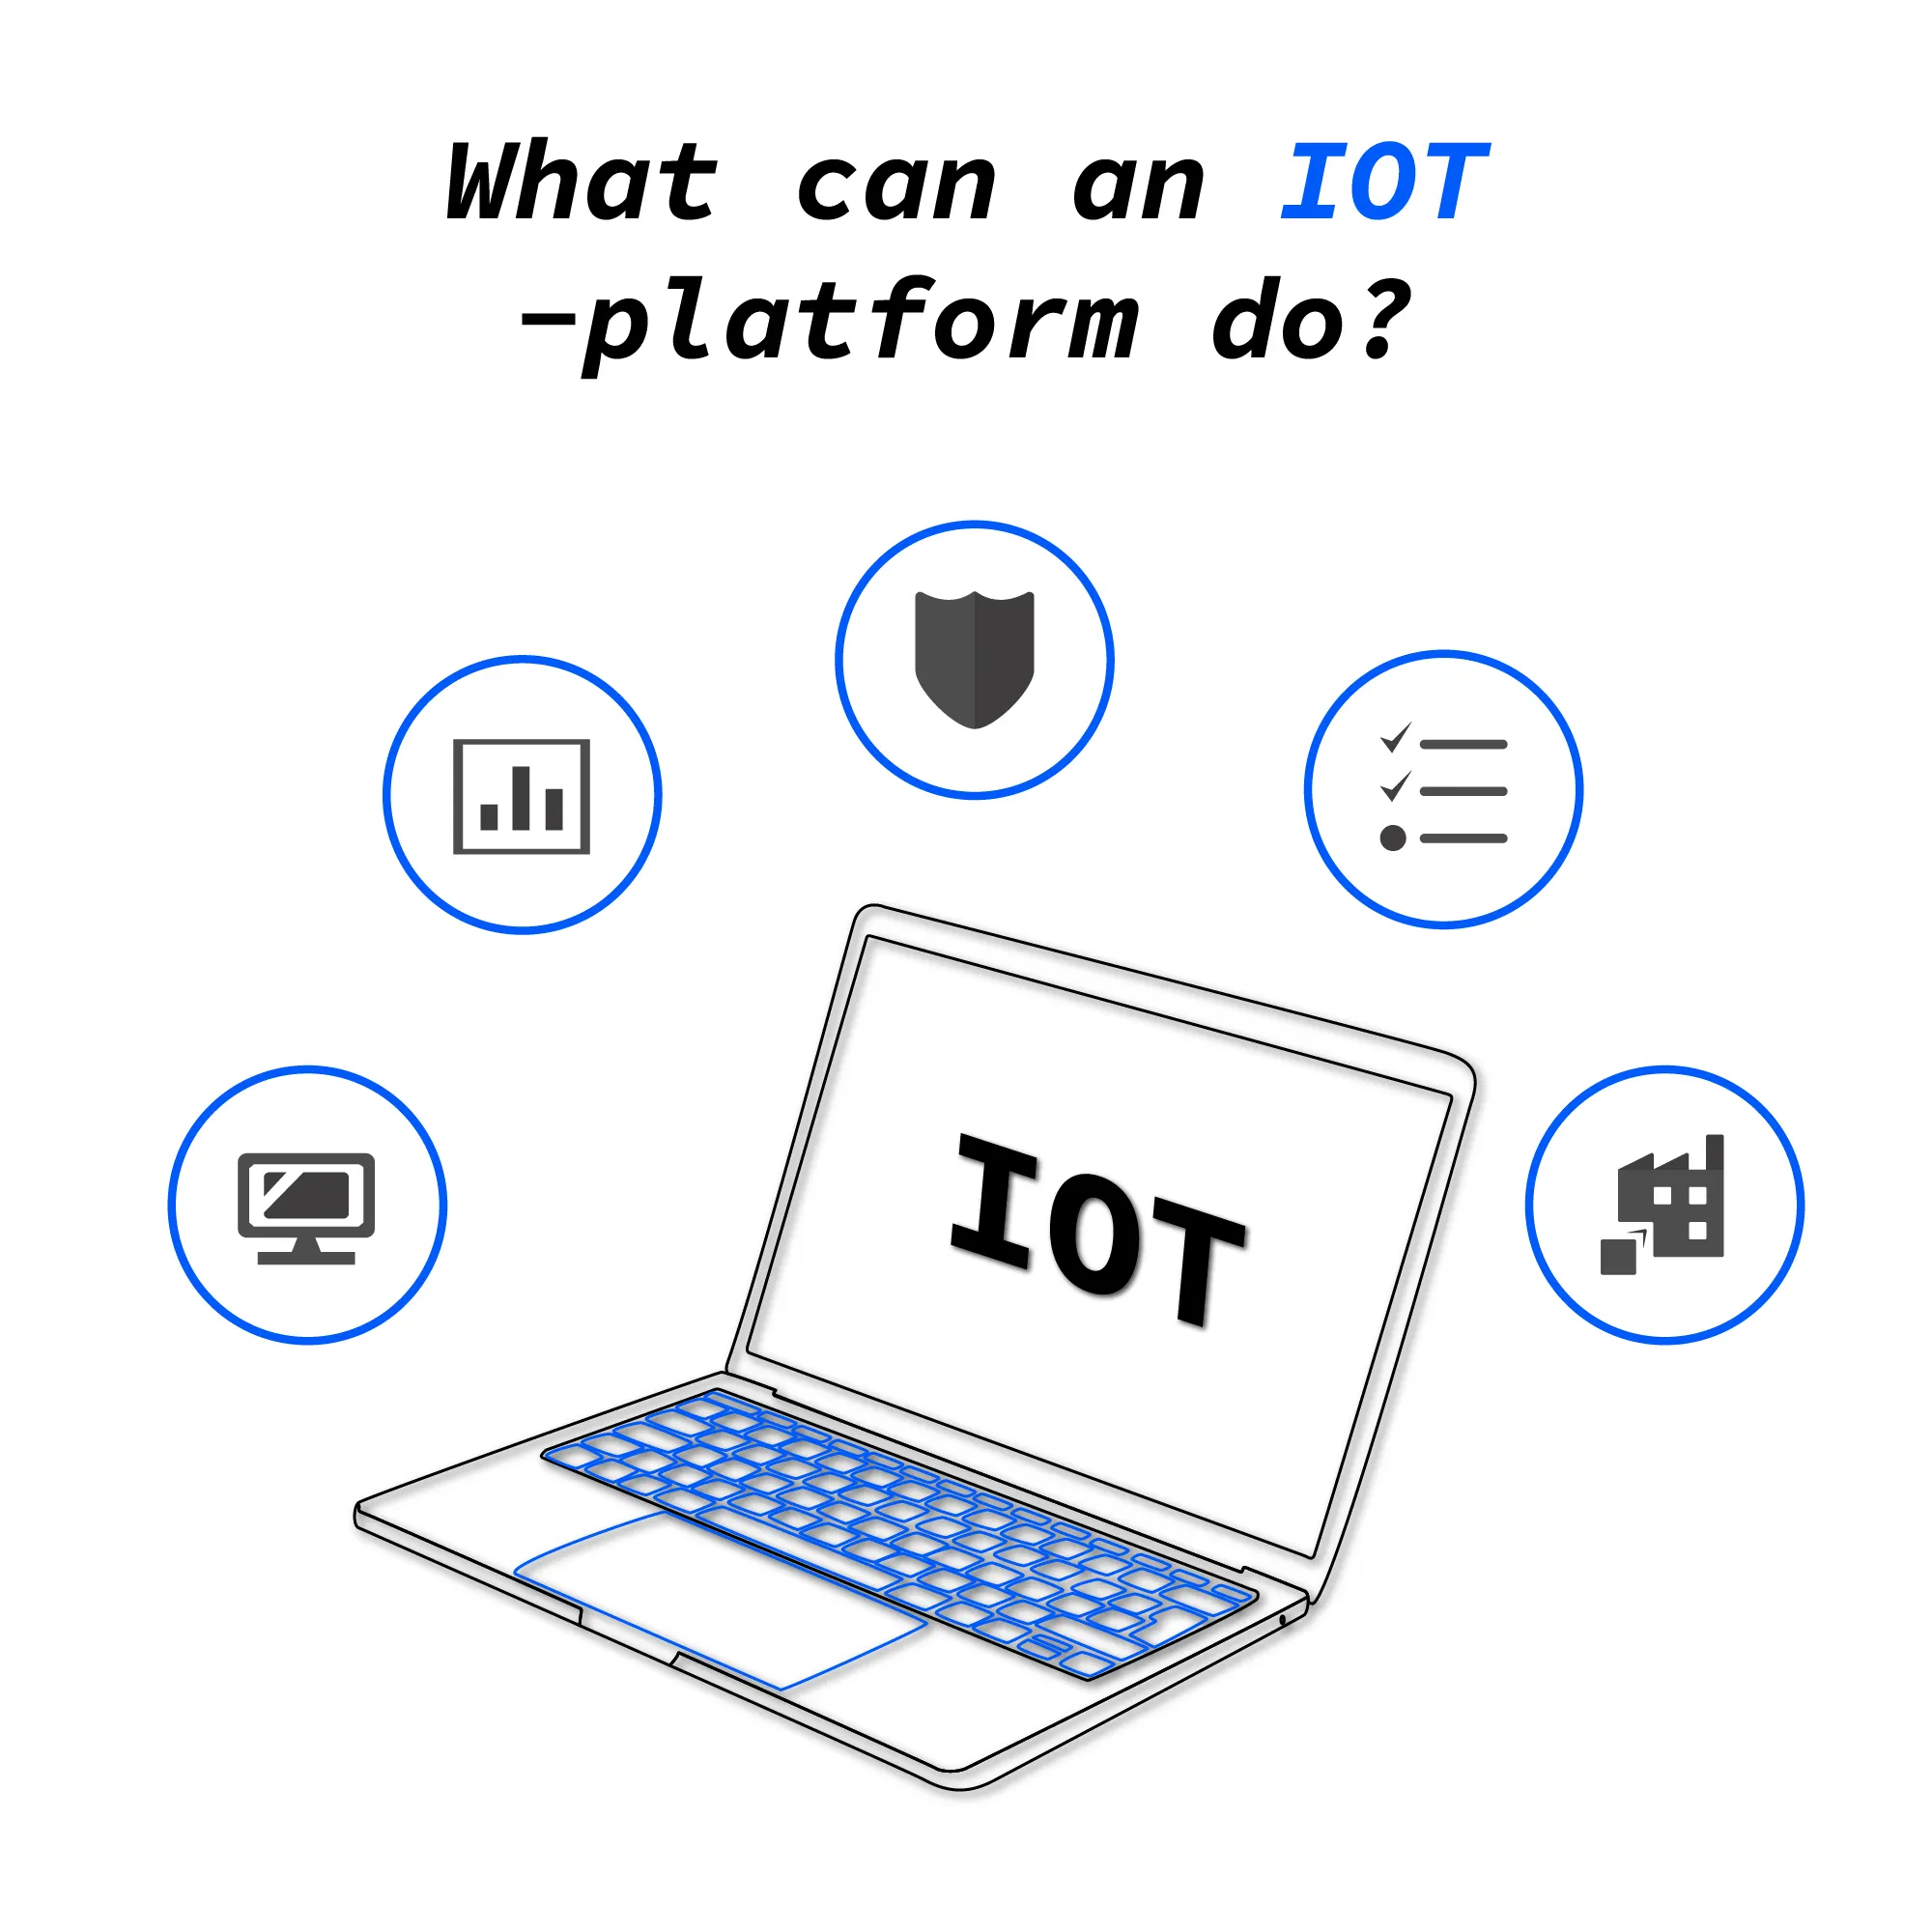 What can IoT platform do